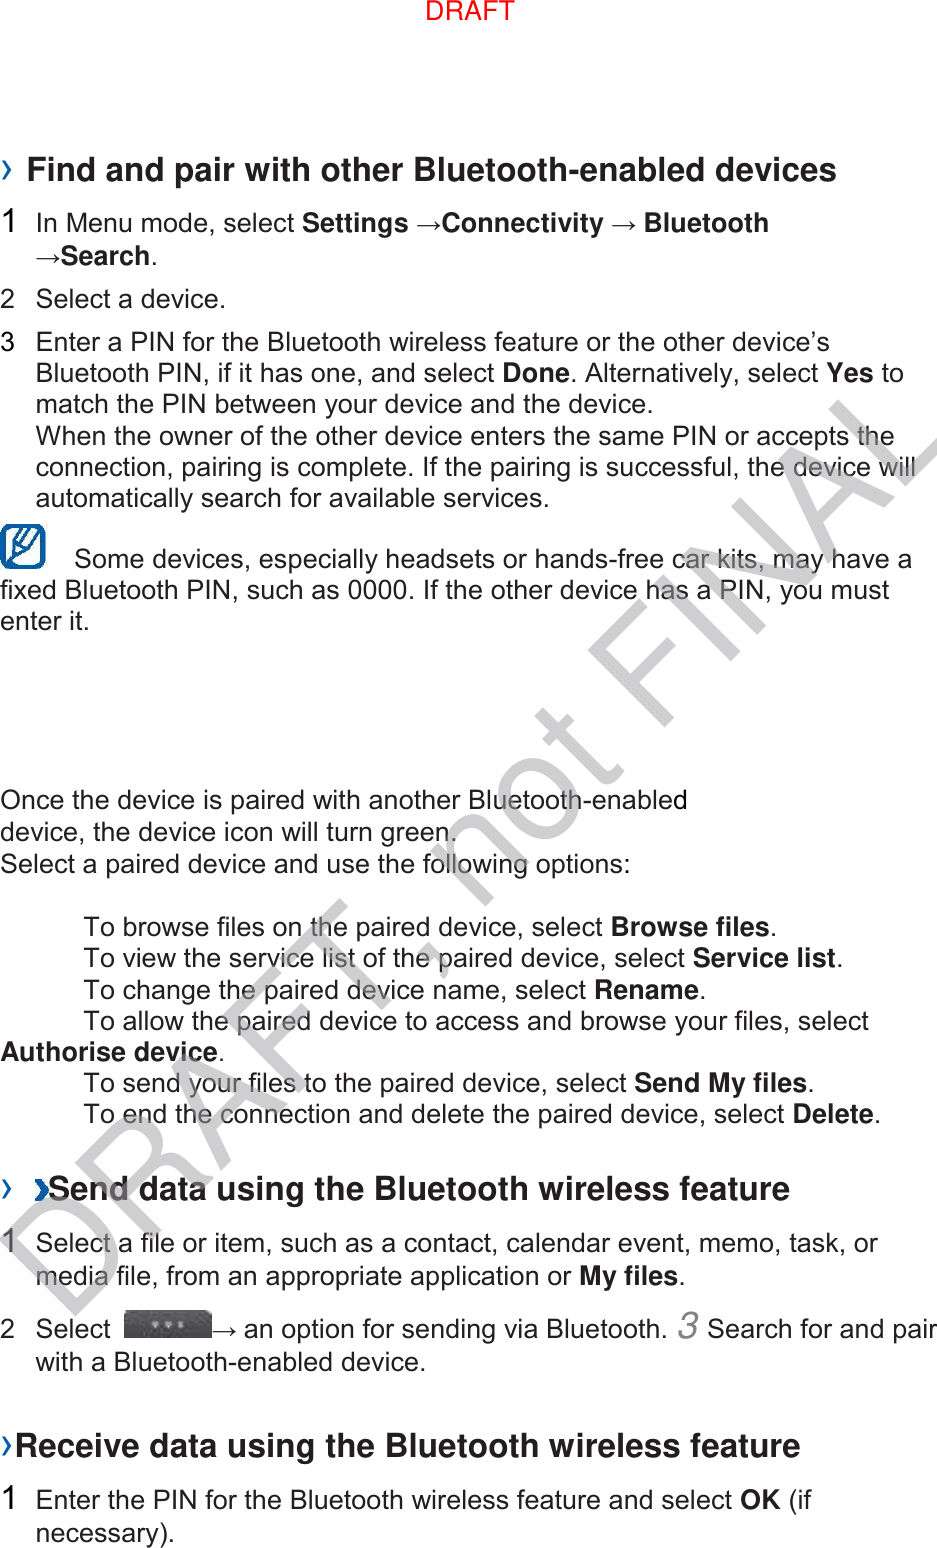 › Find and pair with other Bluetooth-enabled devices   1  In Menu mode, select Settings →Connectivity → Bluetooth →Search.   2  Select a device.   3  Enter a PIN for the Bluetooth wireless feature or the other device’s Bluetooth PIN, if it has one, and select Done. Alternatively, select Yes to match the PIN between your device and the device.   When the owner of the other device enters the same PIN or accepts the connection, pairing is complete. If the pairing is successful, the device will automatically search for available services.     Some devices, especially headsets or hands-free car kits, may have a fixed Bluetooth PIN, such as 0000. If the other device has a PIN, you must enter it.   Once the device is paired with another Bluetooth-enabled device, the device icon will turn green. Select a paired device and use the following options:    To browse files on the paired device, select Browse files.     To view the service list of the paired device, select Service list.     To change the paired device name, select Rename.    To allow the paired device to access and browse your files, select Authorise device.     To send your files to the paired device, select Send My files.     To end the connection and delete the paired device, select Delete.    ›  Send data using the Bluetooth wireless feature   1  Select a file or item, such as a contact, calendar event, memo, task, or media file, from an appropriate application or My files.   2  Select  → an option for sending via Bluetooth. 3 Search for and pair with a Bluetooth-enabled device.   ›Receive data using the Bluetooth wireless feature   1  Enter the PIN for the Bluetooth wireless feature and select OK (if necessary).   DRAFT, not FINALDRAFT